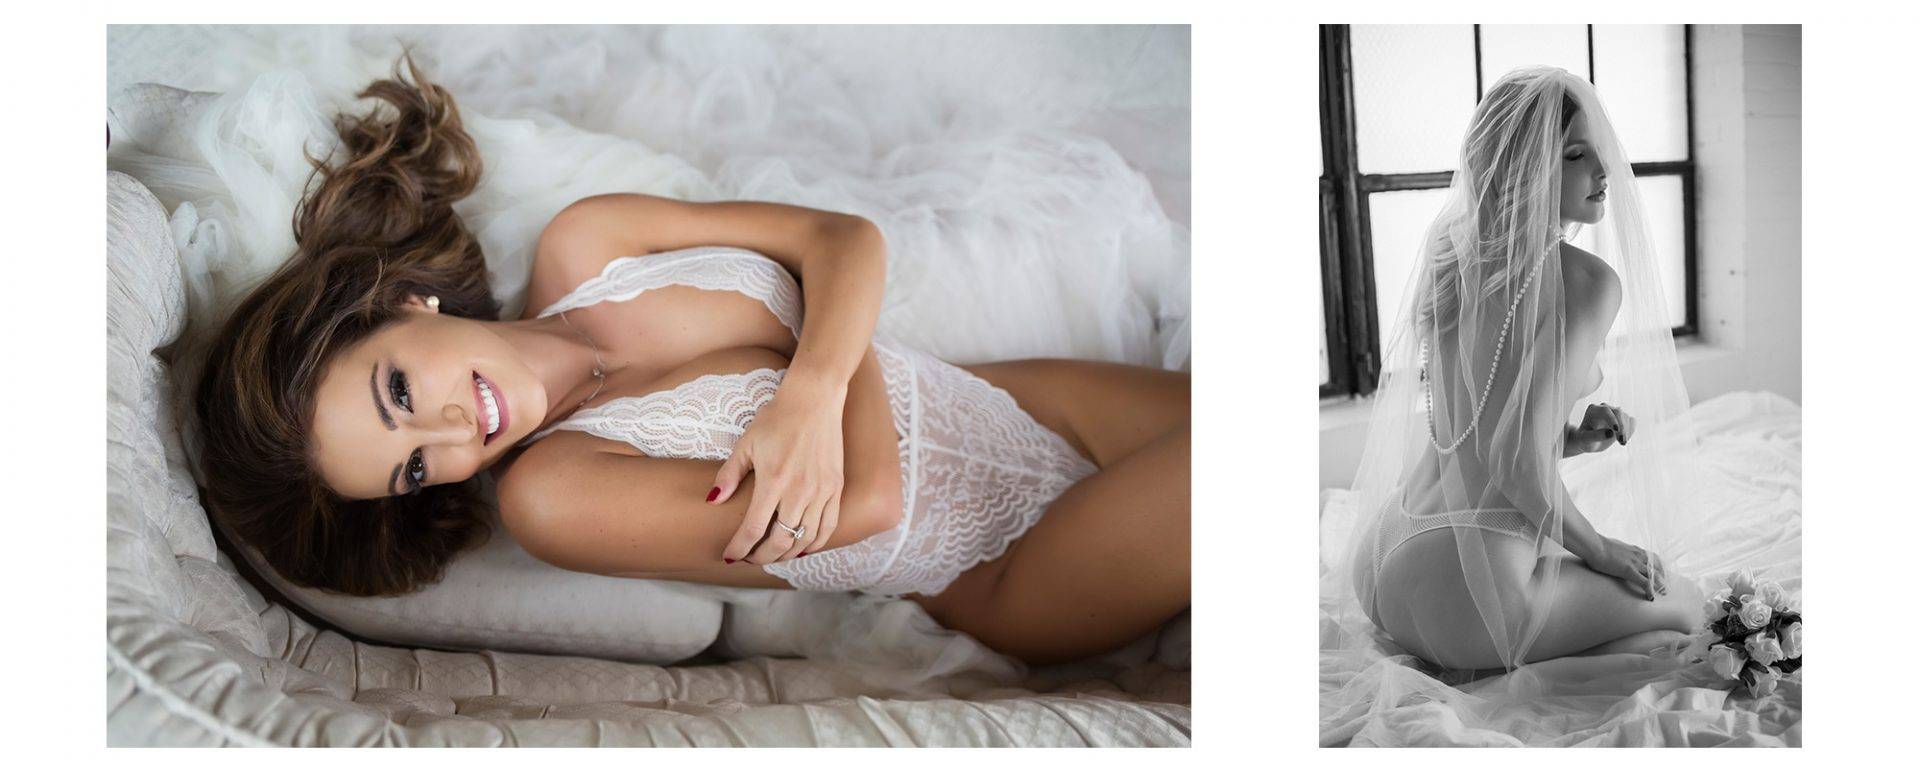 Best boudoir photographer captured a lady posing in white lingerie, veil, pearls and flowers